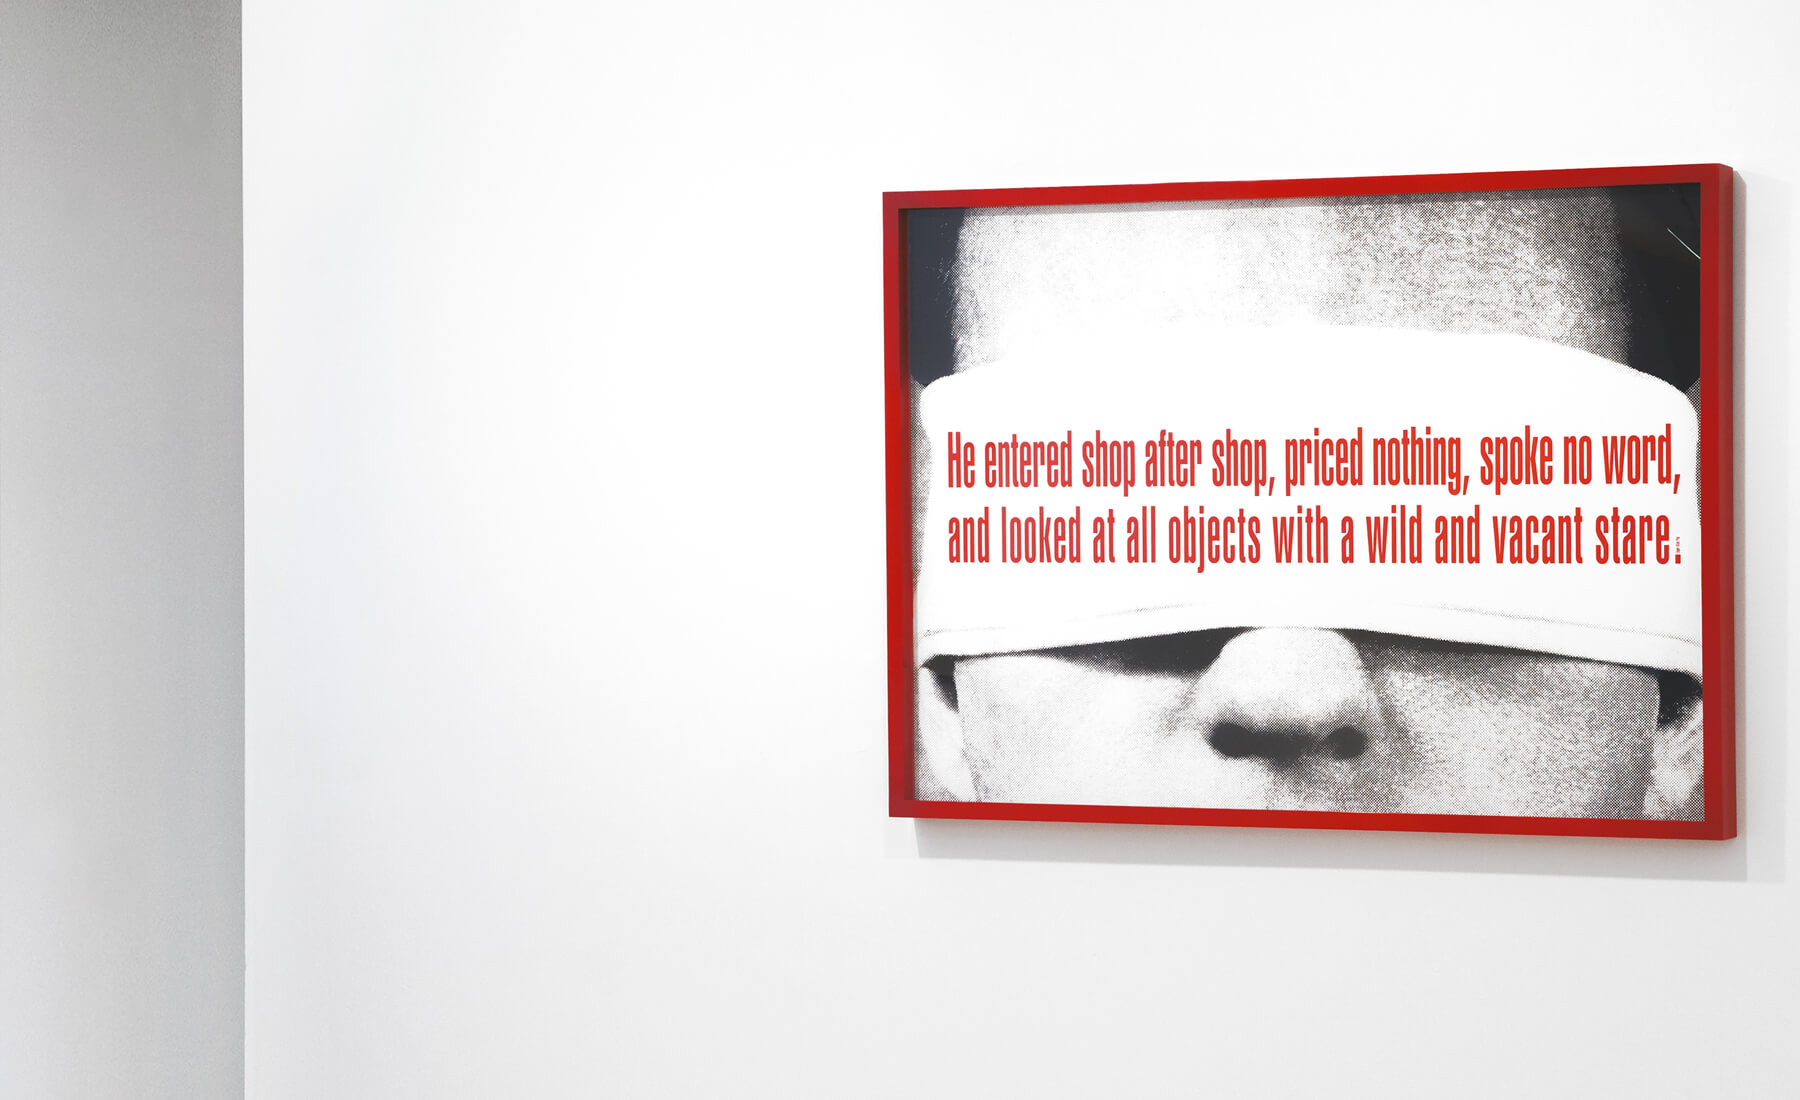 Installation Sgorbati Projects, April 2016
                                       OPEN SOURCE INDICATORS
                                      Artists Pictured: Barbara Kruger
                                    